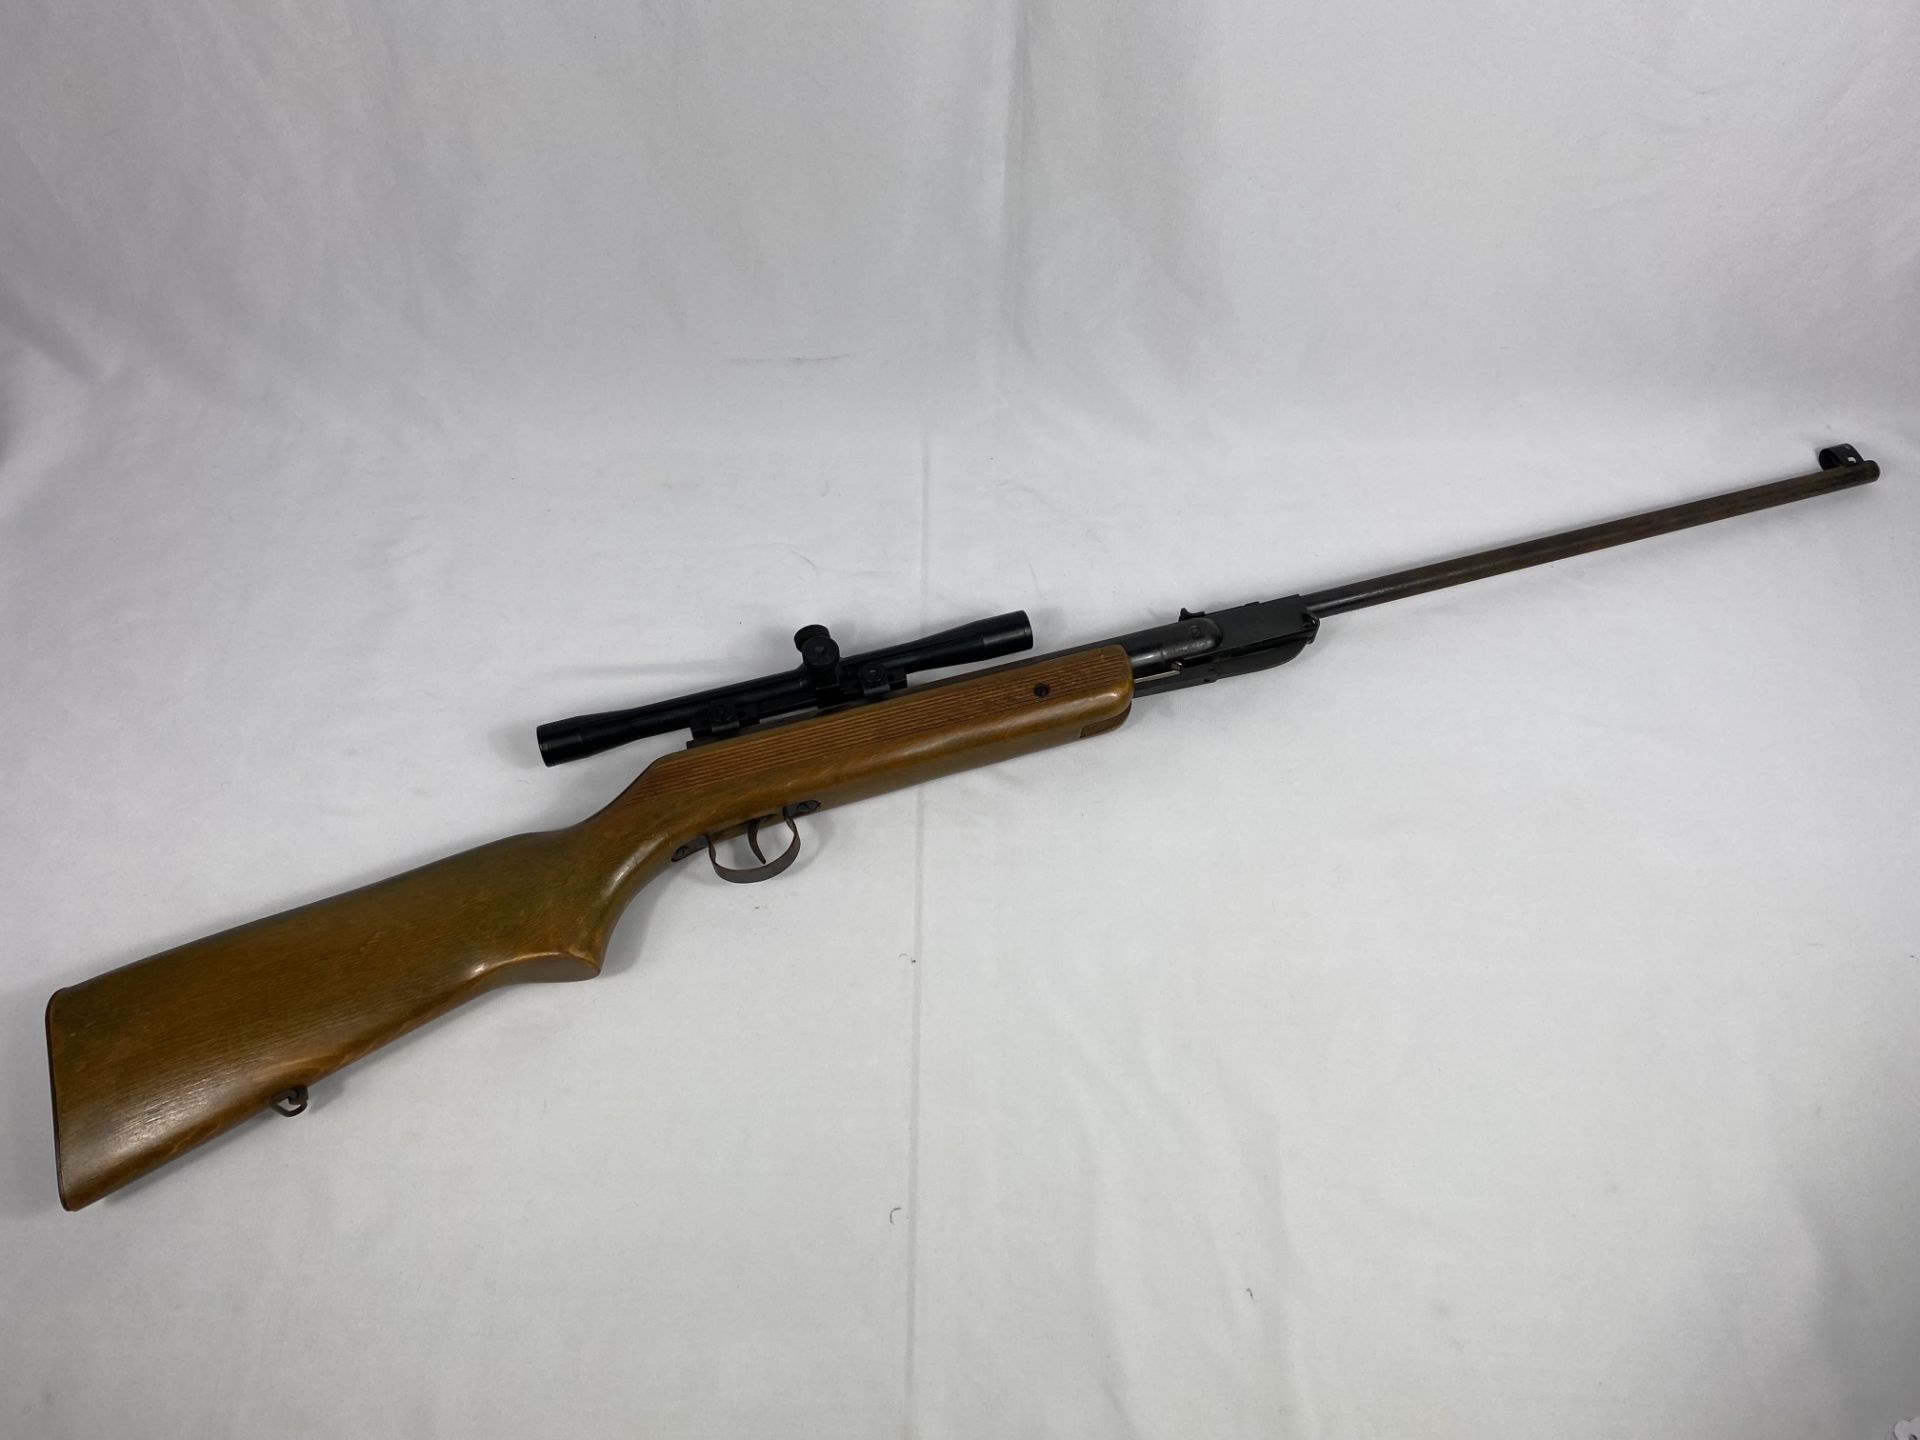 Air rifle with telescopic sight